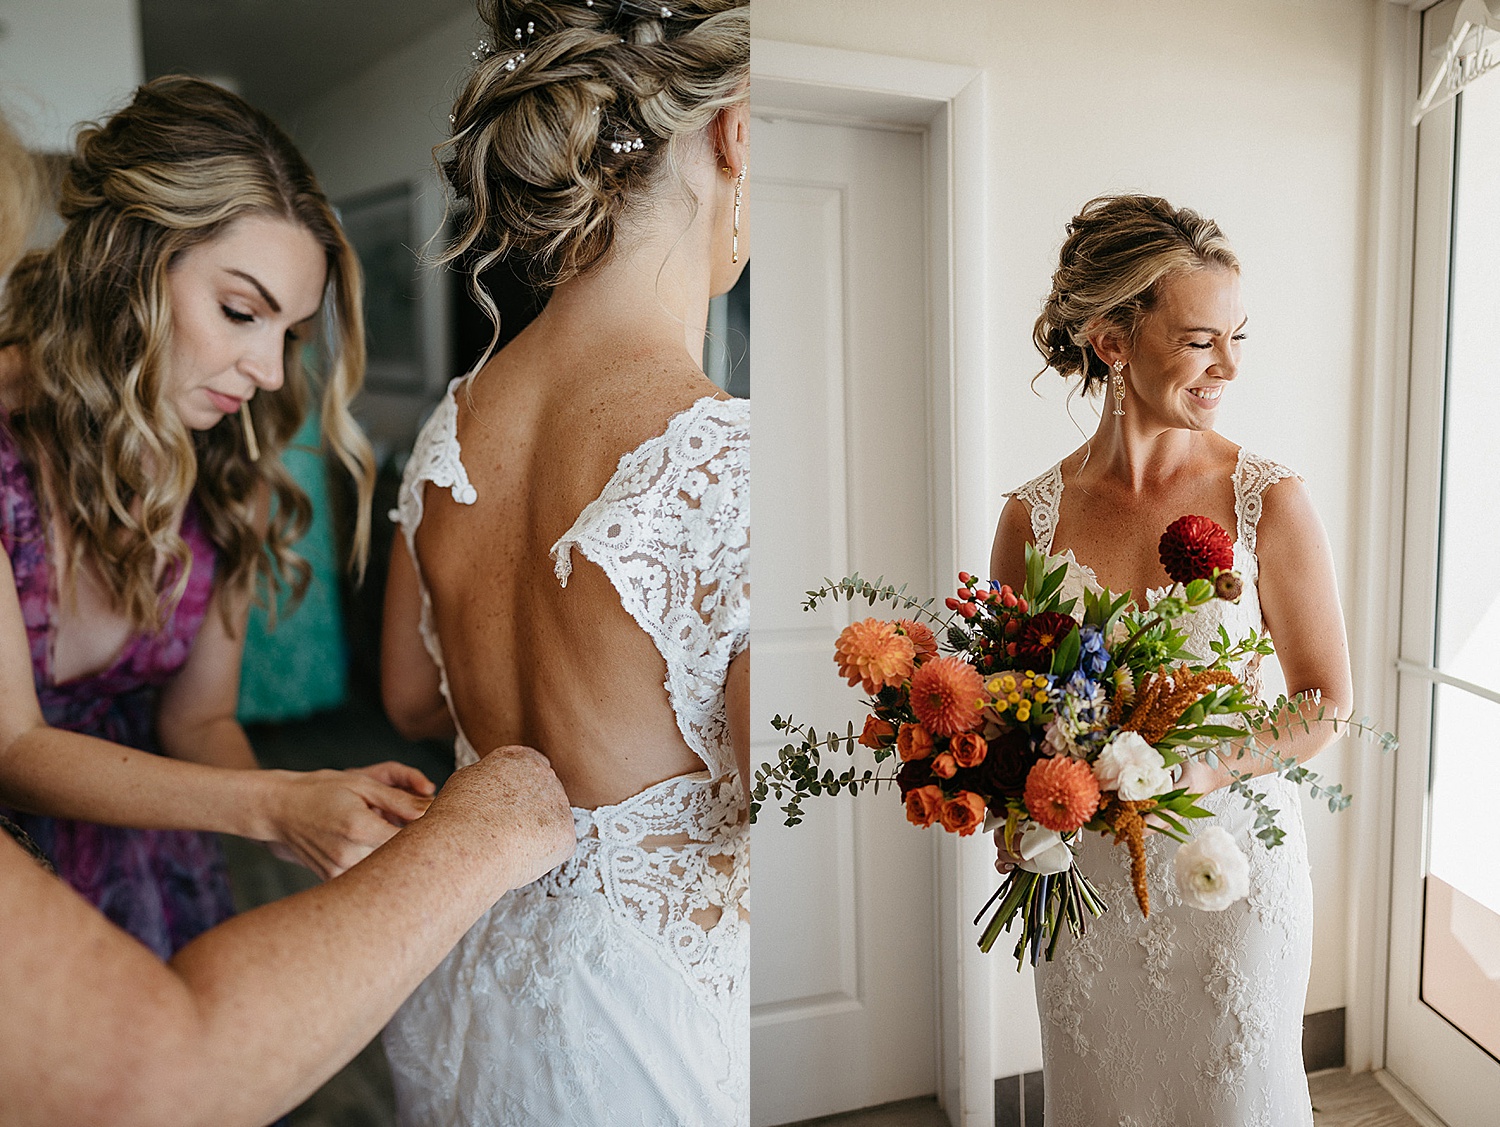 Mother of the bride and bridesmaid helping clip the wedding dress while Bride holds wedding bouquet